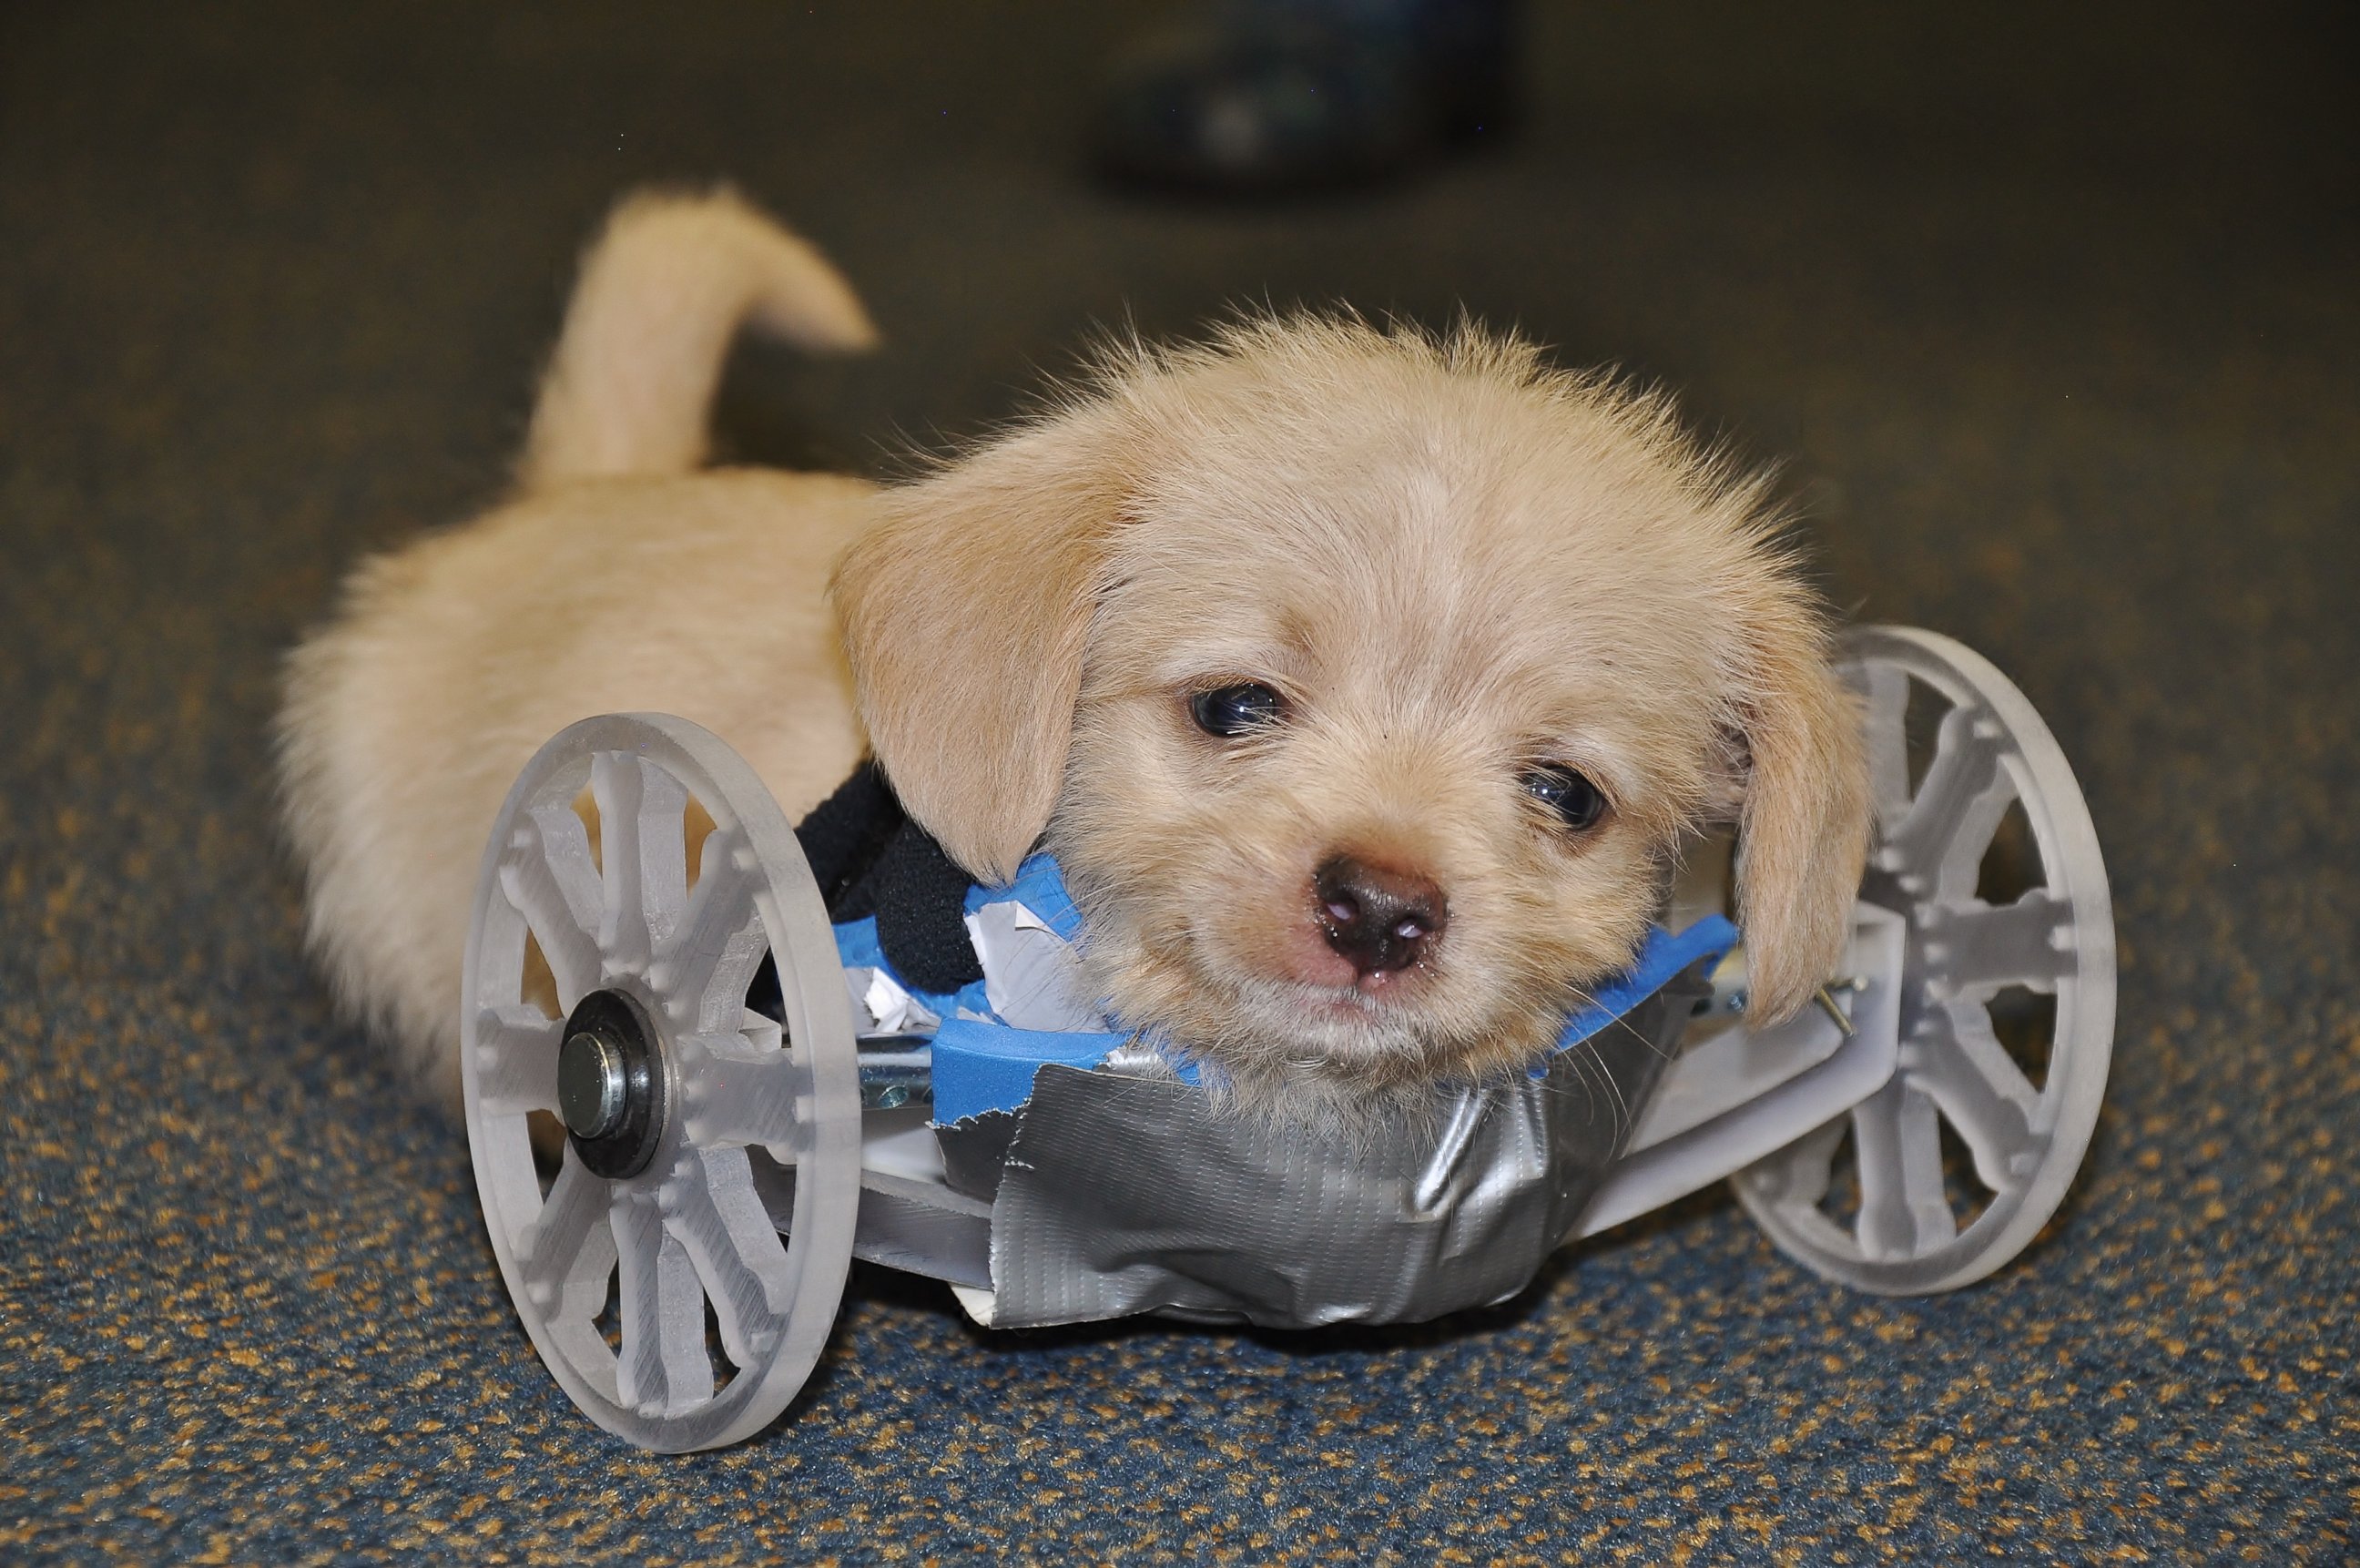 PHOTO: Tumbles, the two-legged puppy, was given a 3-D printed wheel cart by the Ohio University Innovation Center last week.